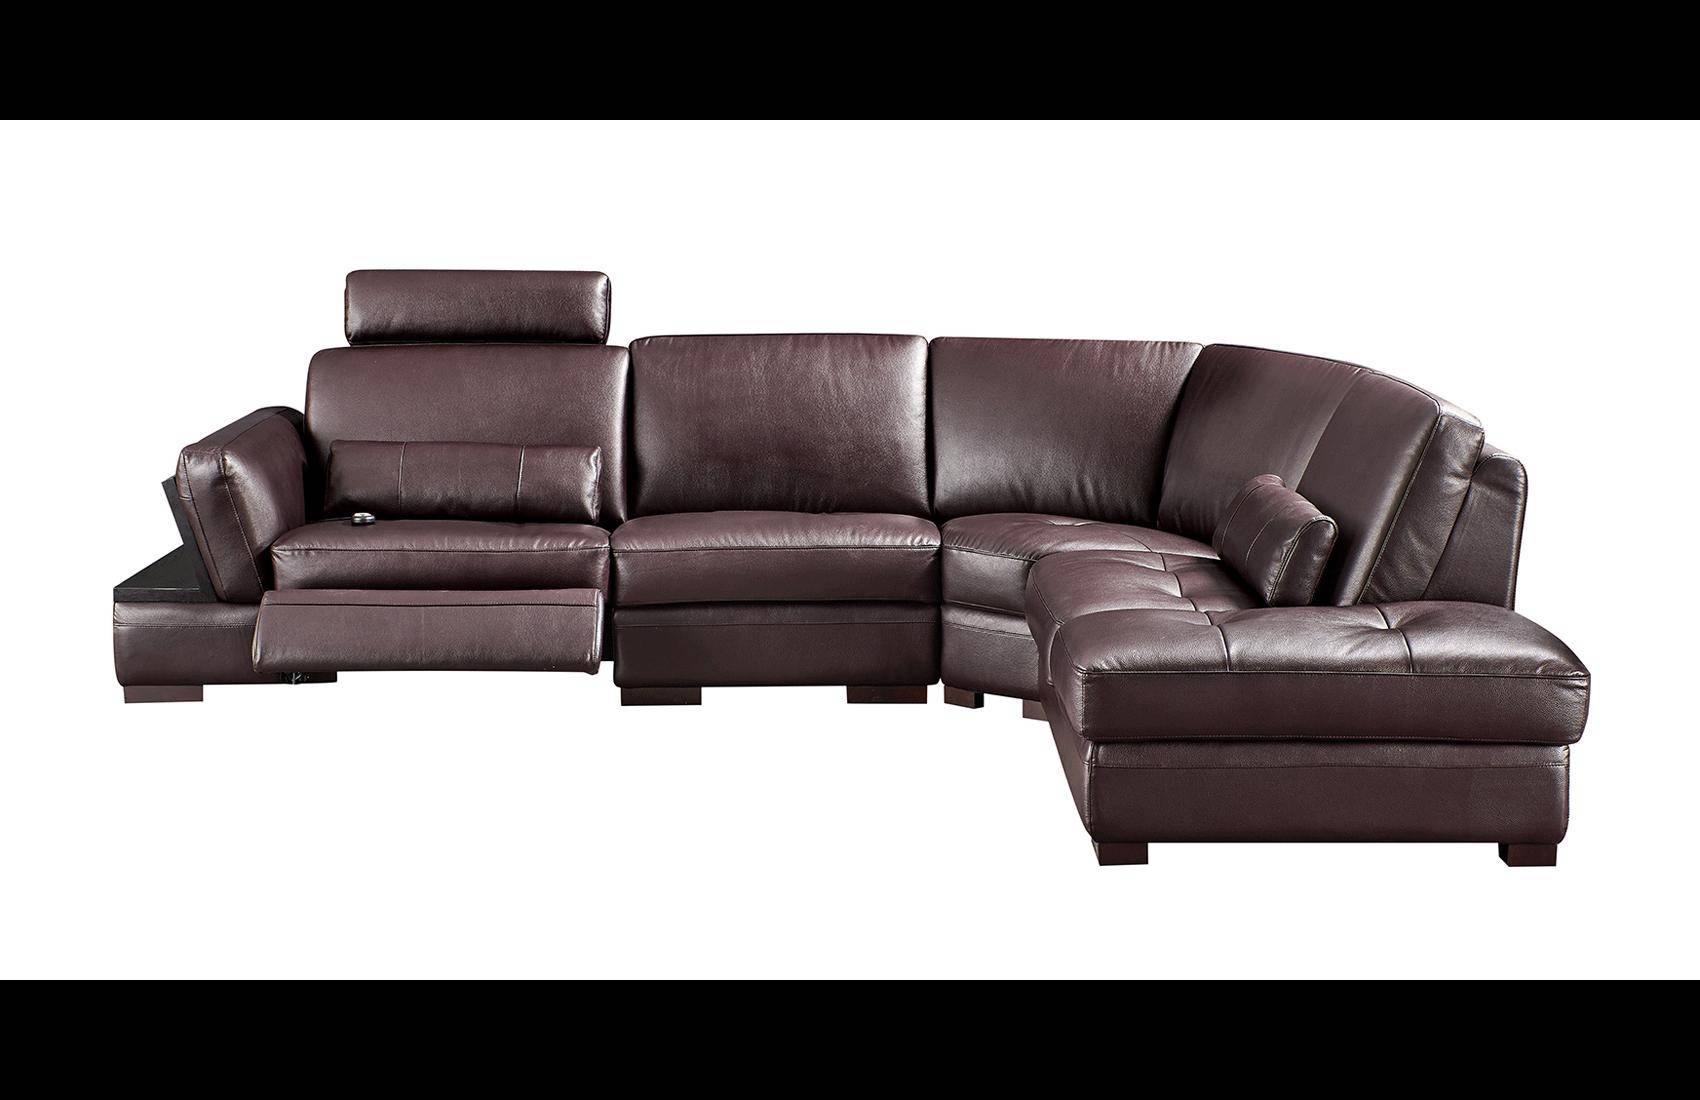 Esf 445 Reclining Sectional Left, Dark Brown Leather Recliner Sectional